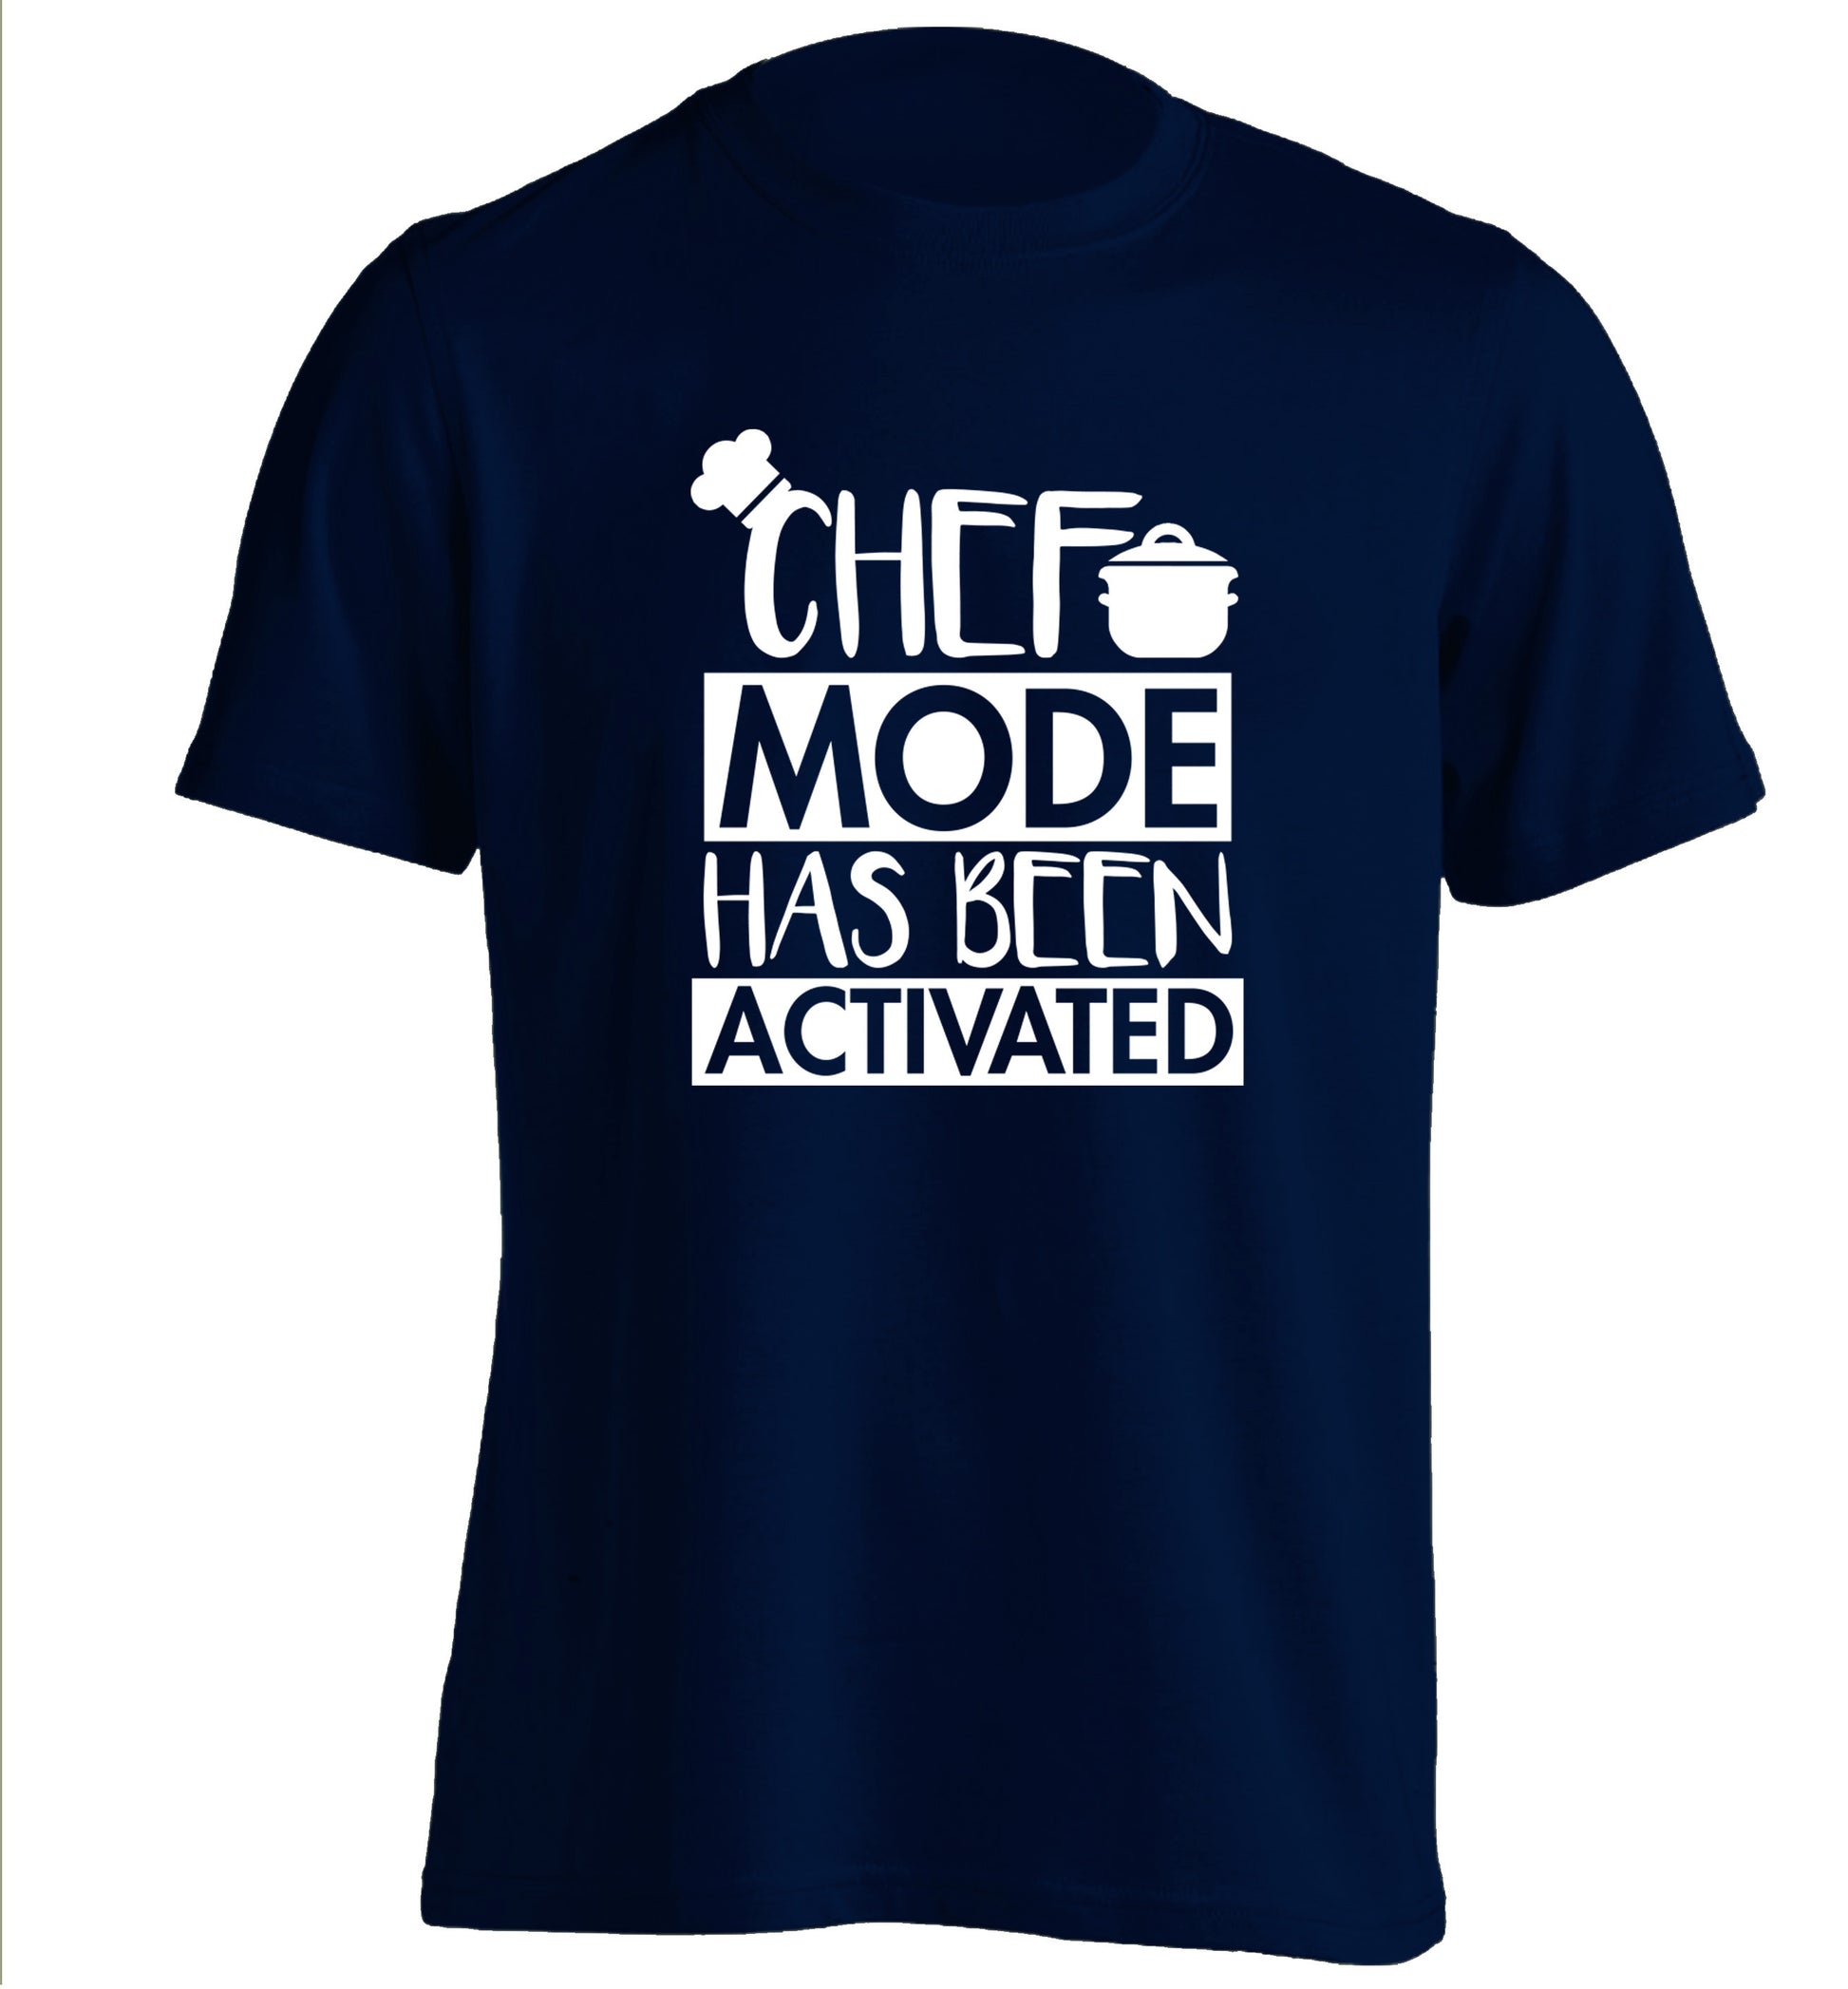 Chef mode has been activated adults unisex navy Tshirt 2XL